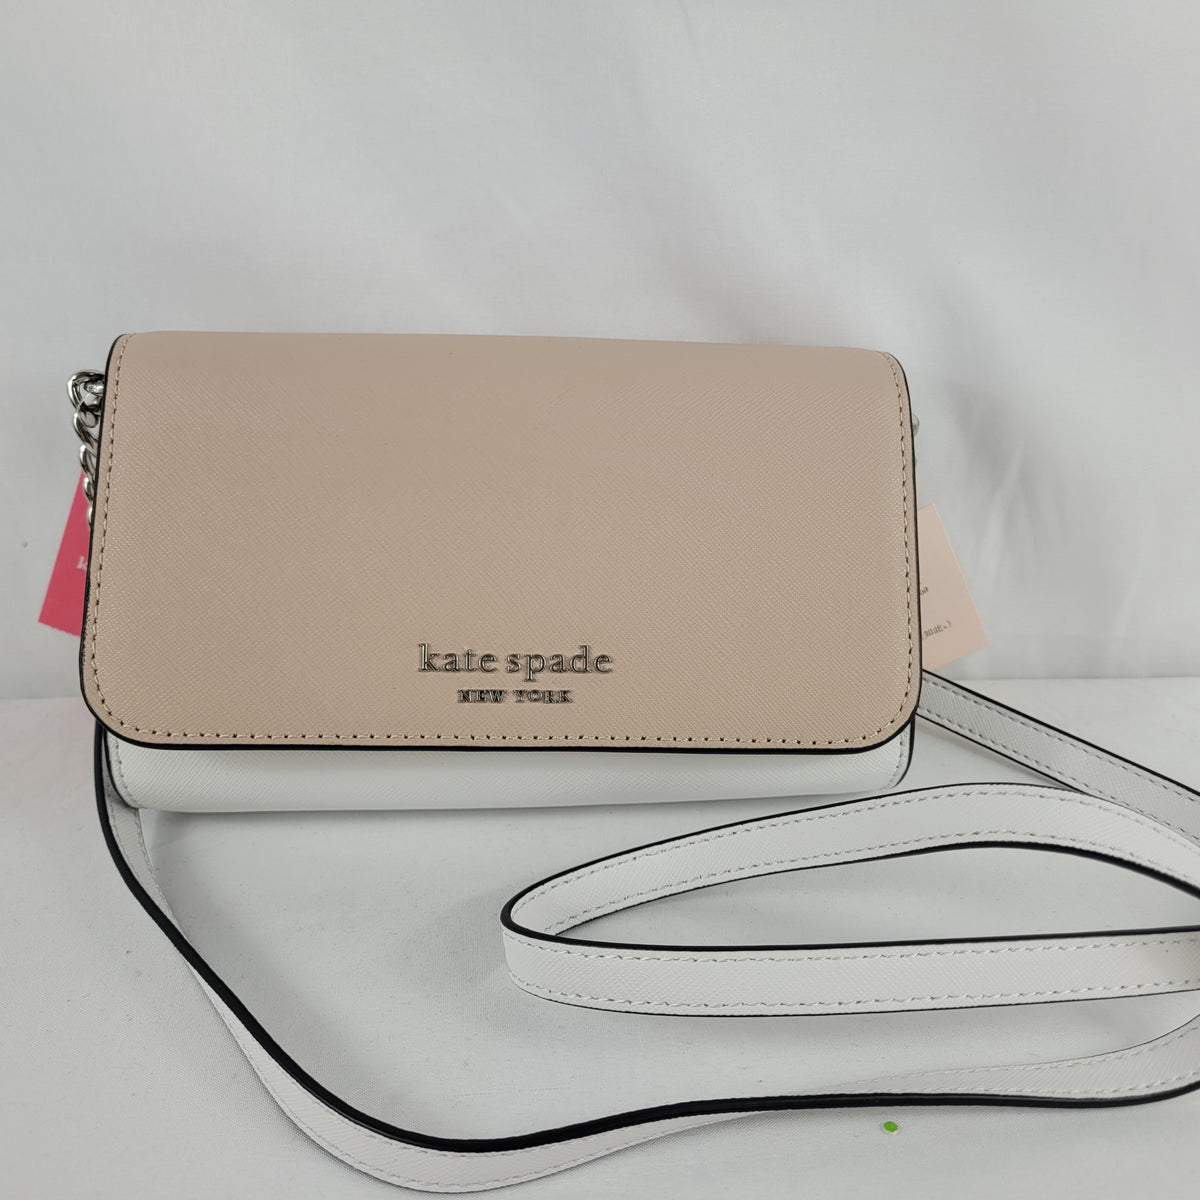 Brand New] KATE SPADE STACI SMALL FLAP CROSSBODY PHONE CASE WALLET